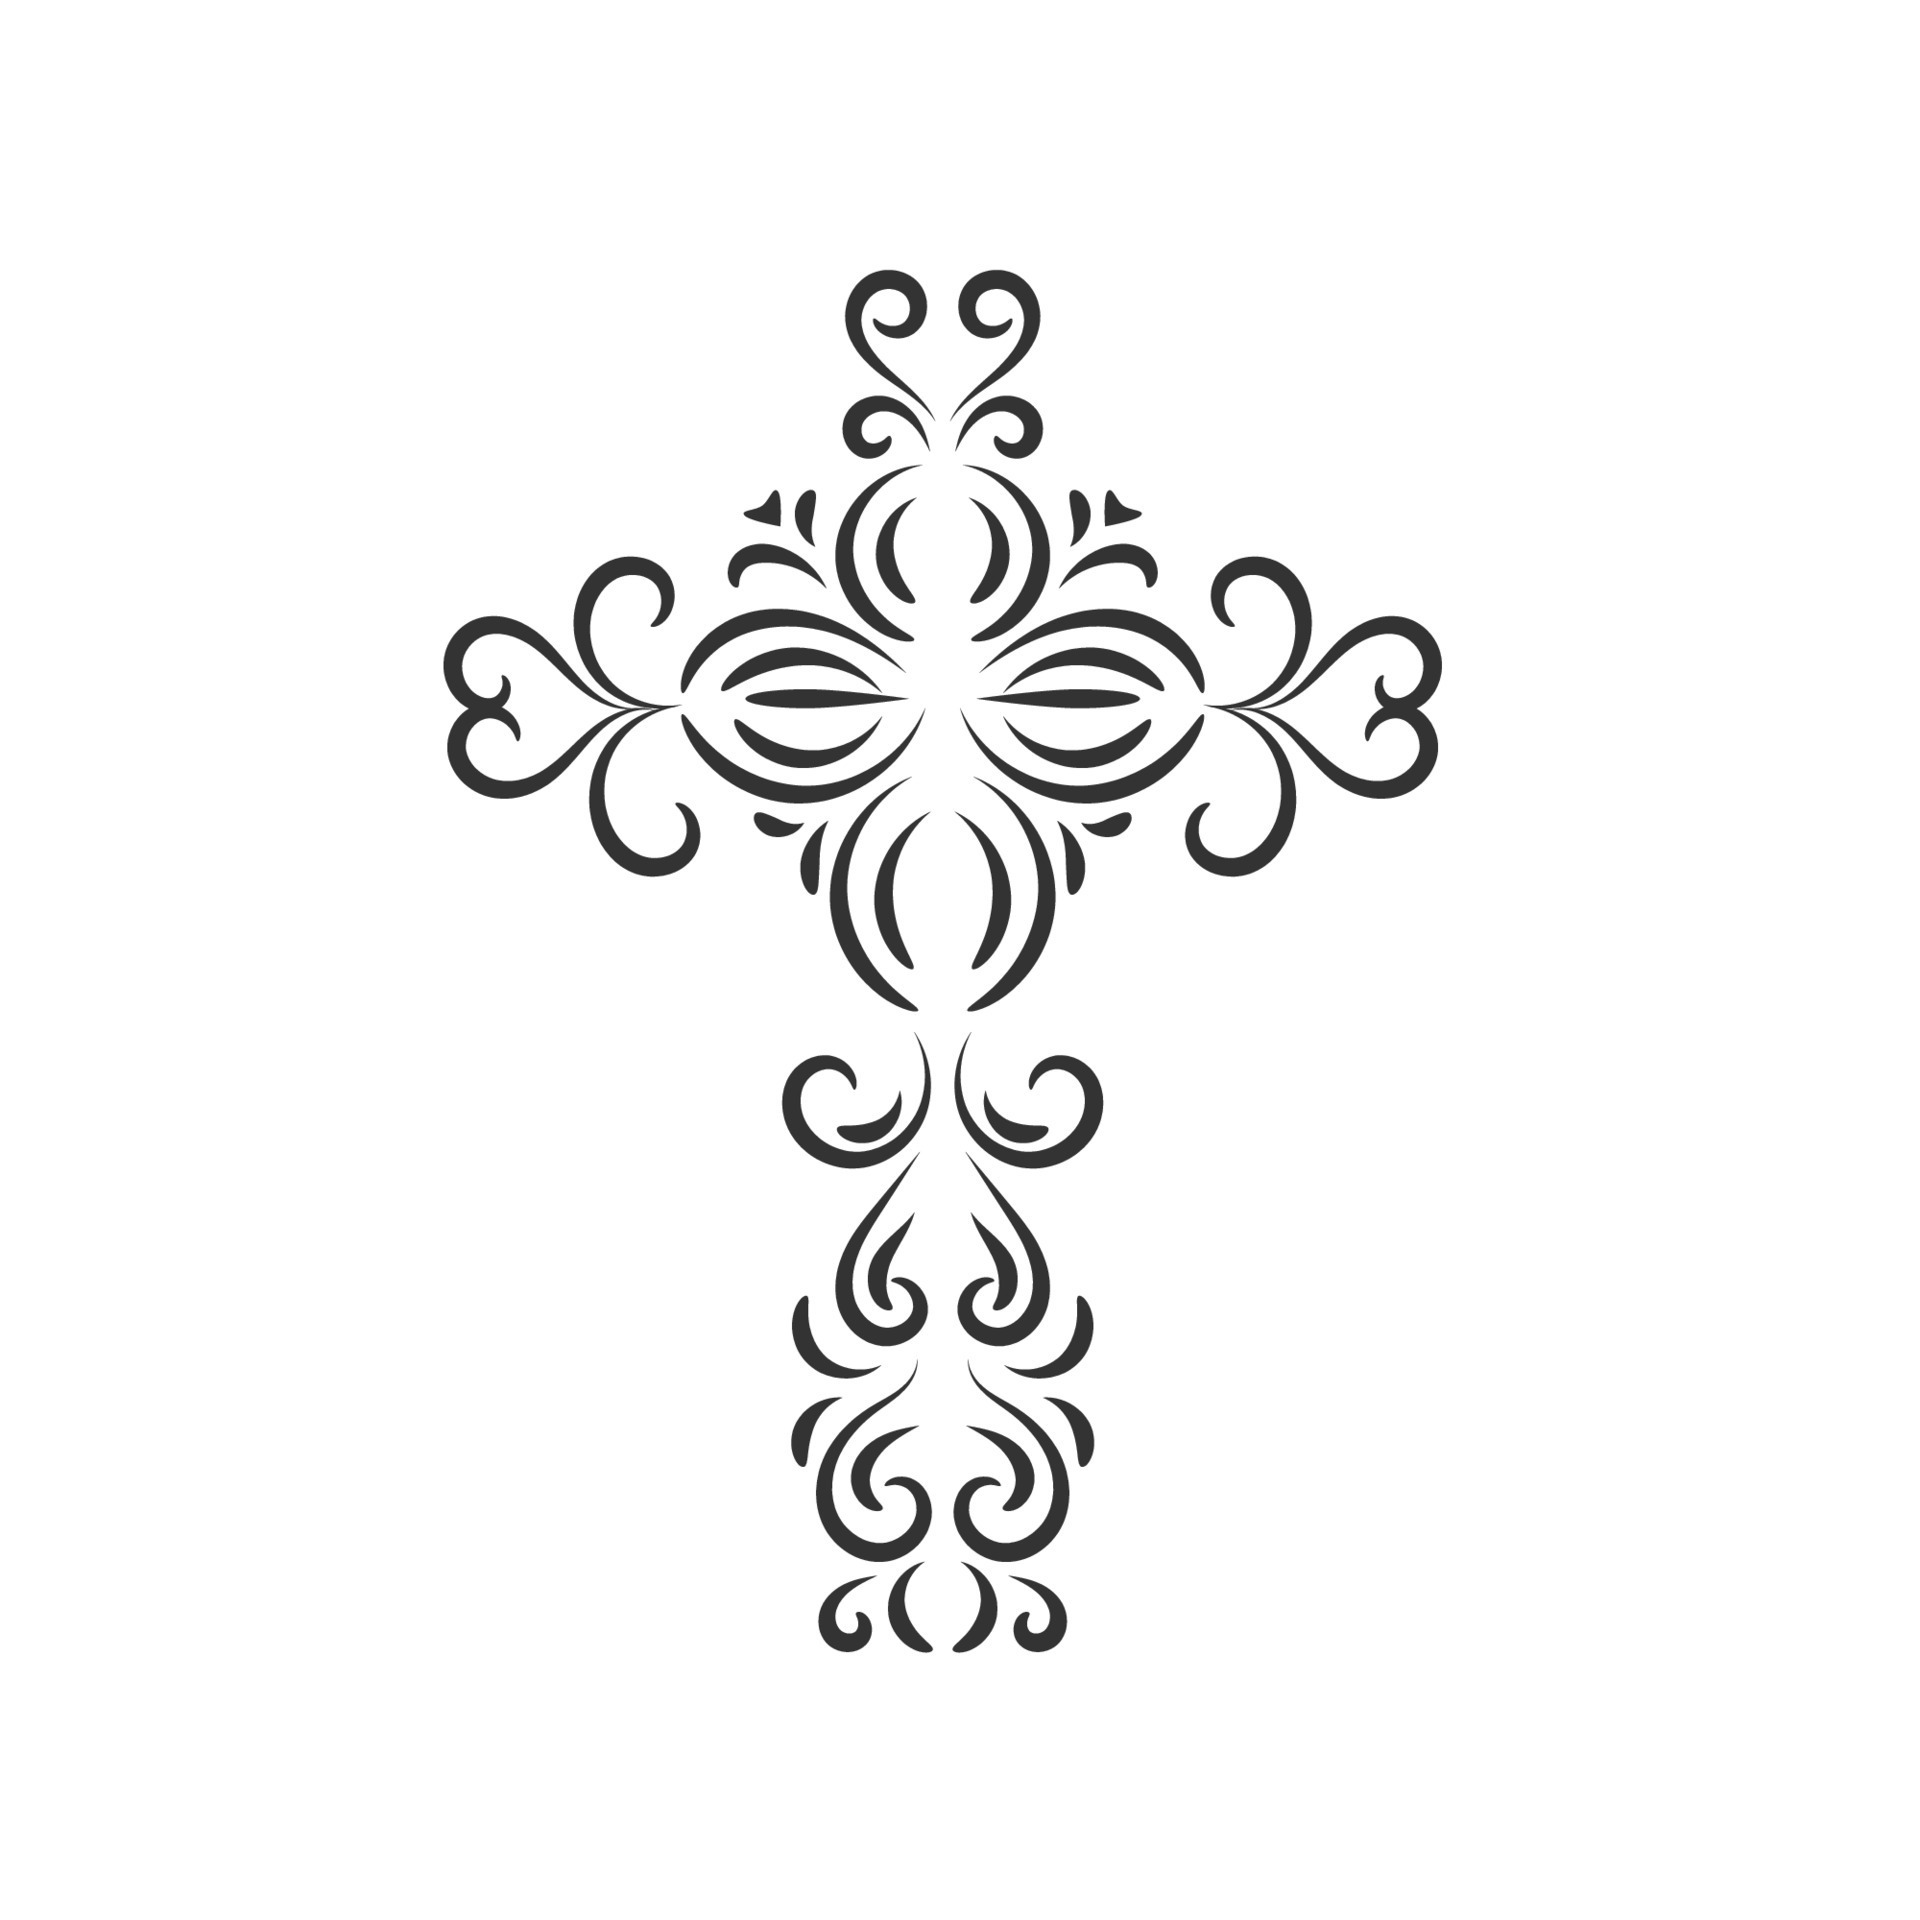 Holy cross design for tattoo design Royalty Free Vector